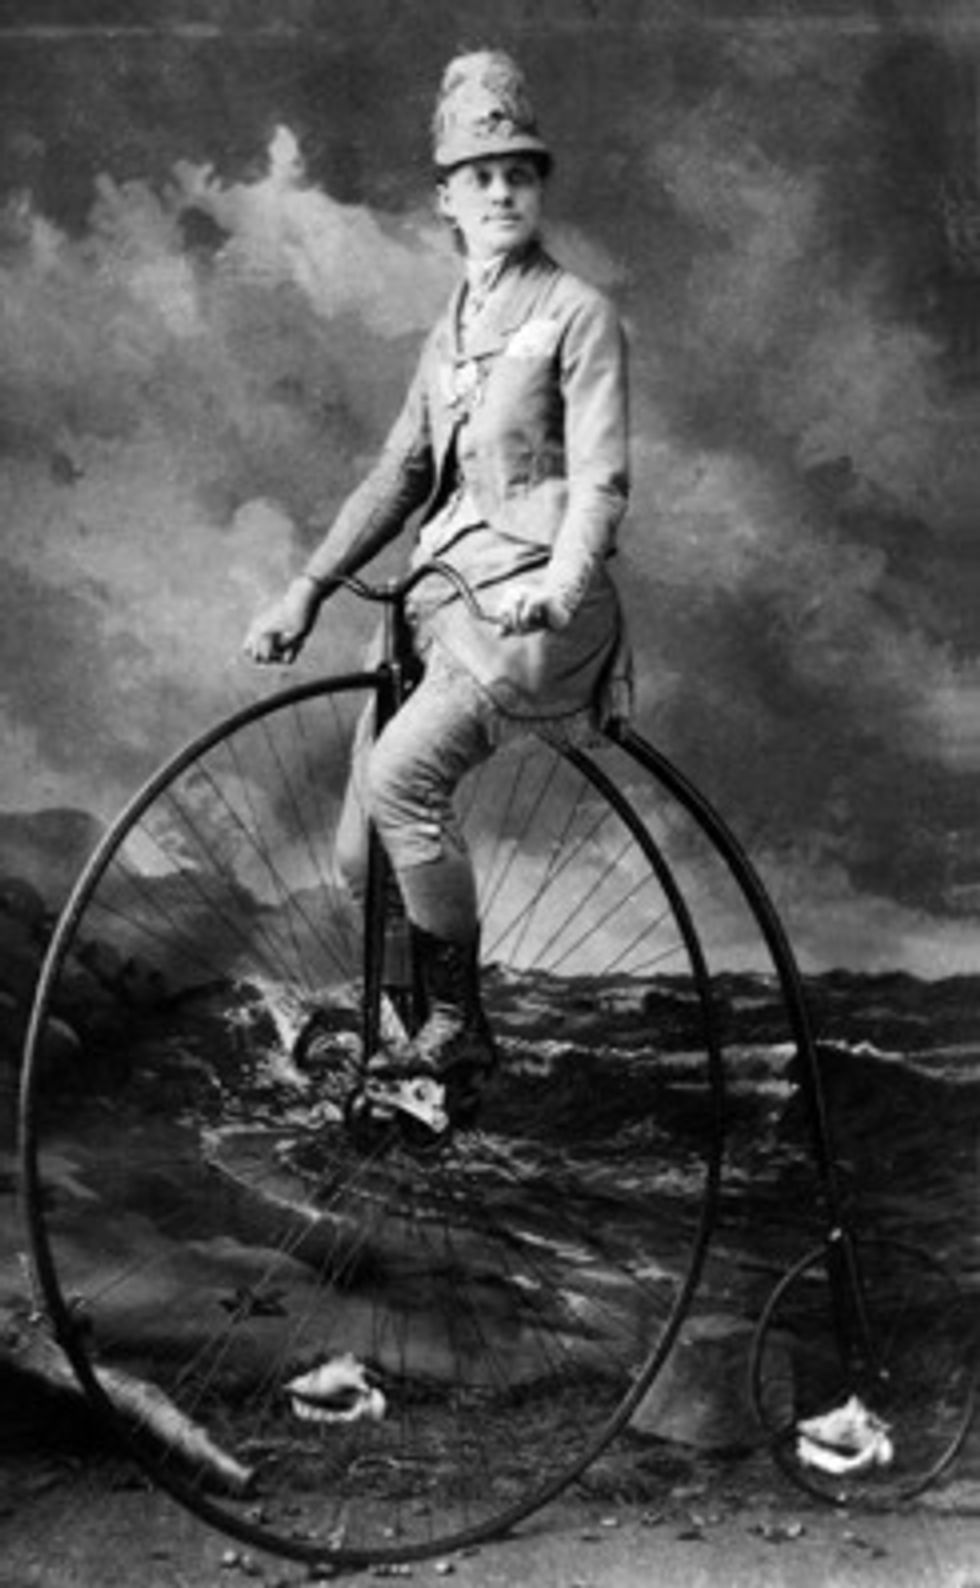 How Bicycles Helped Emancipate Women